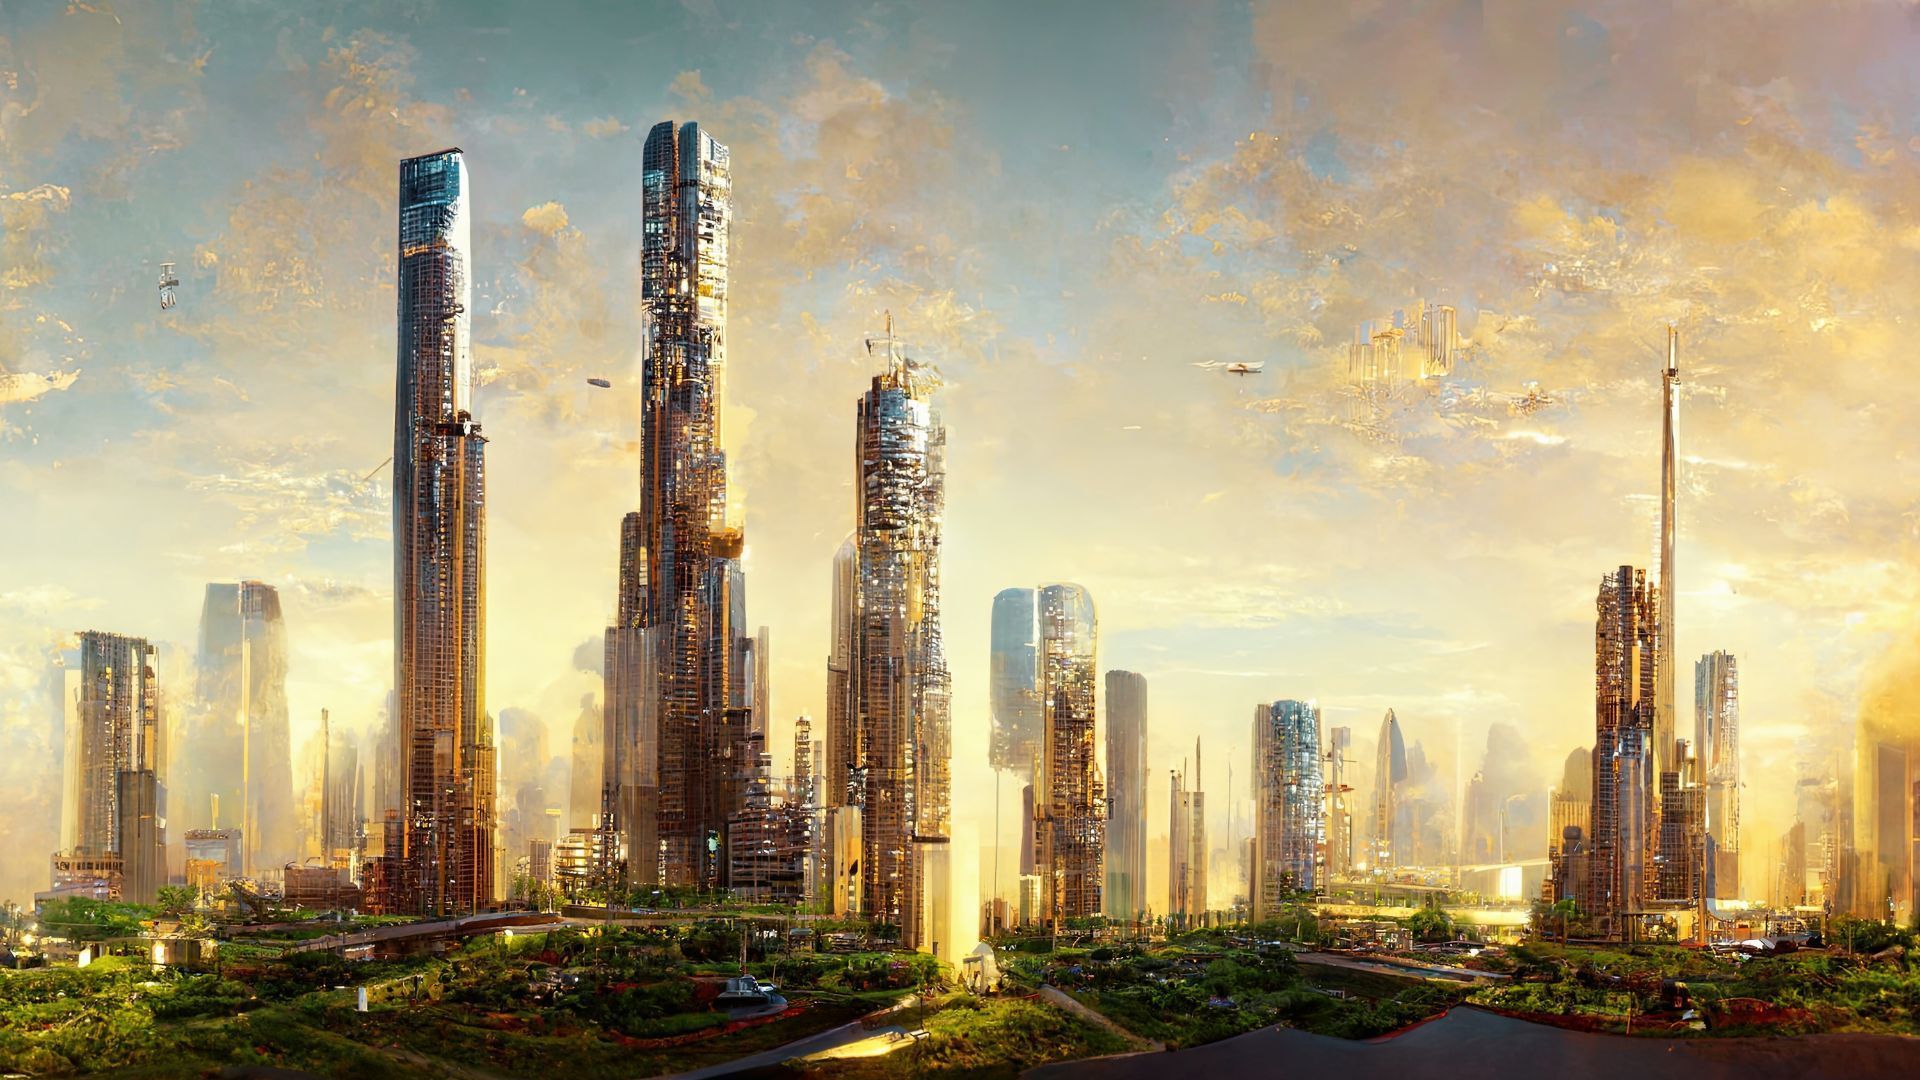 Futuristic Cities Around The World: An Example Of Unthinkable Innovations